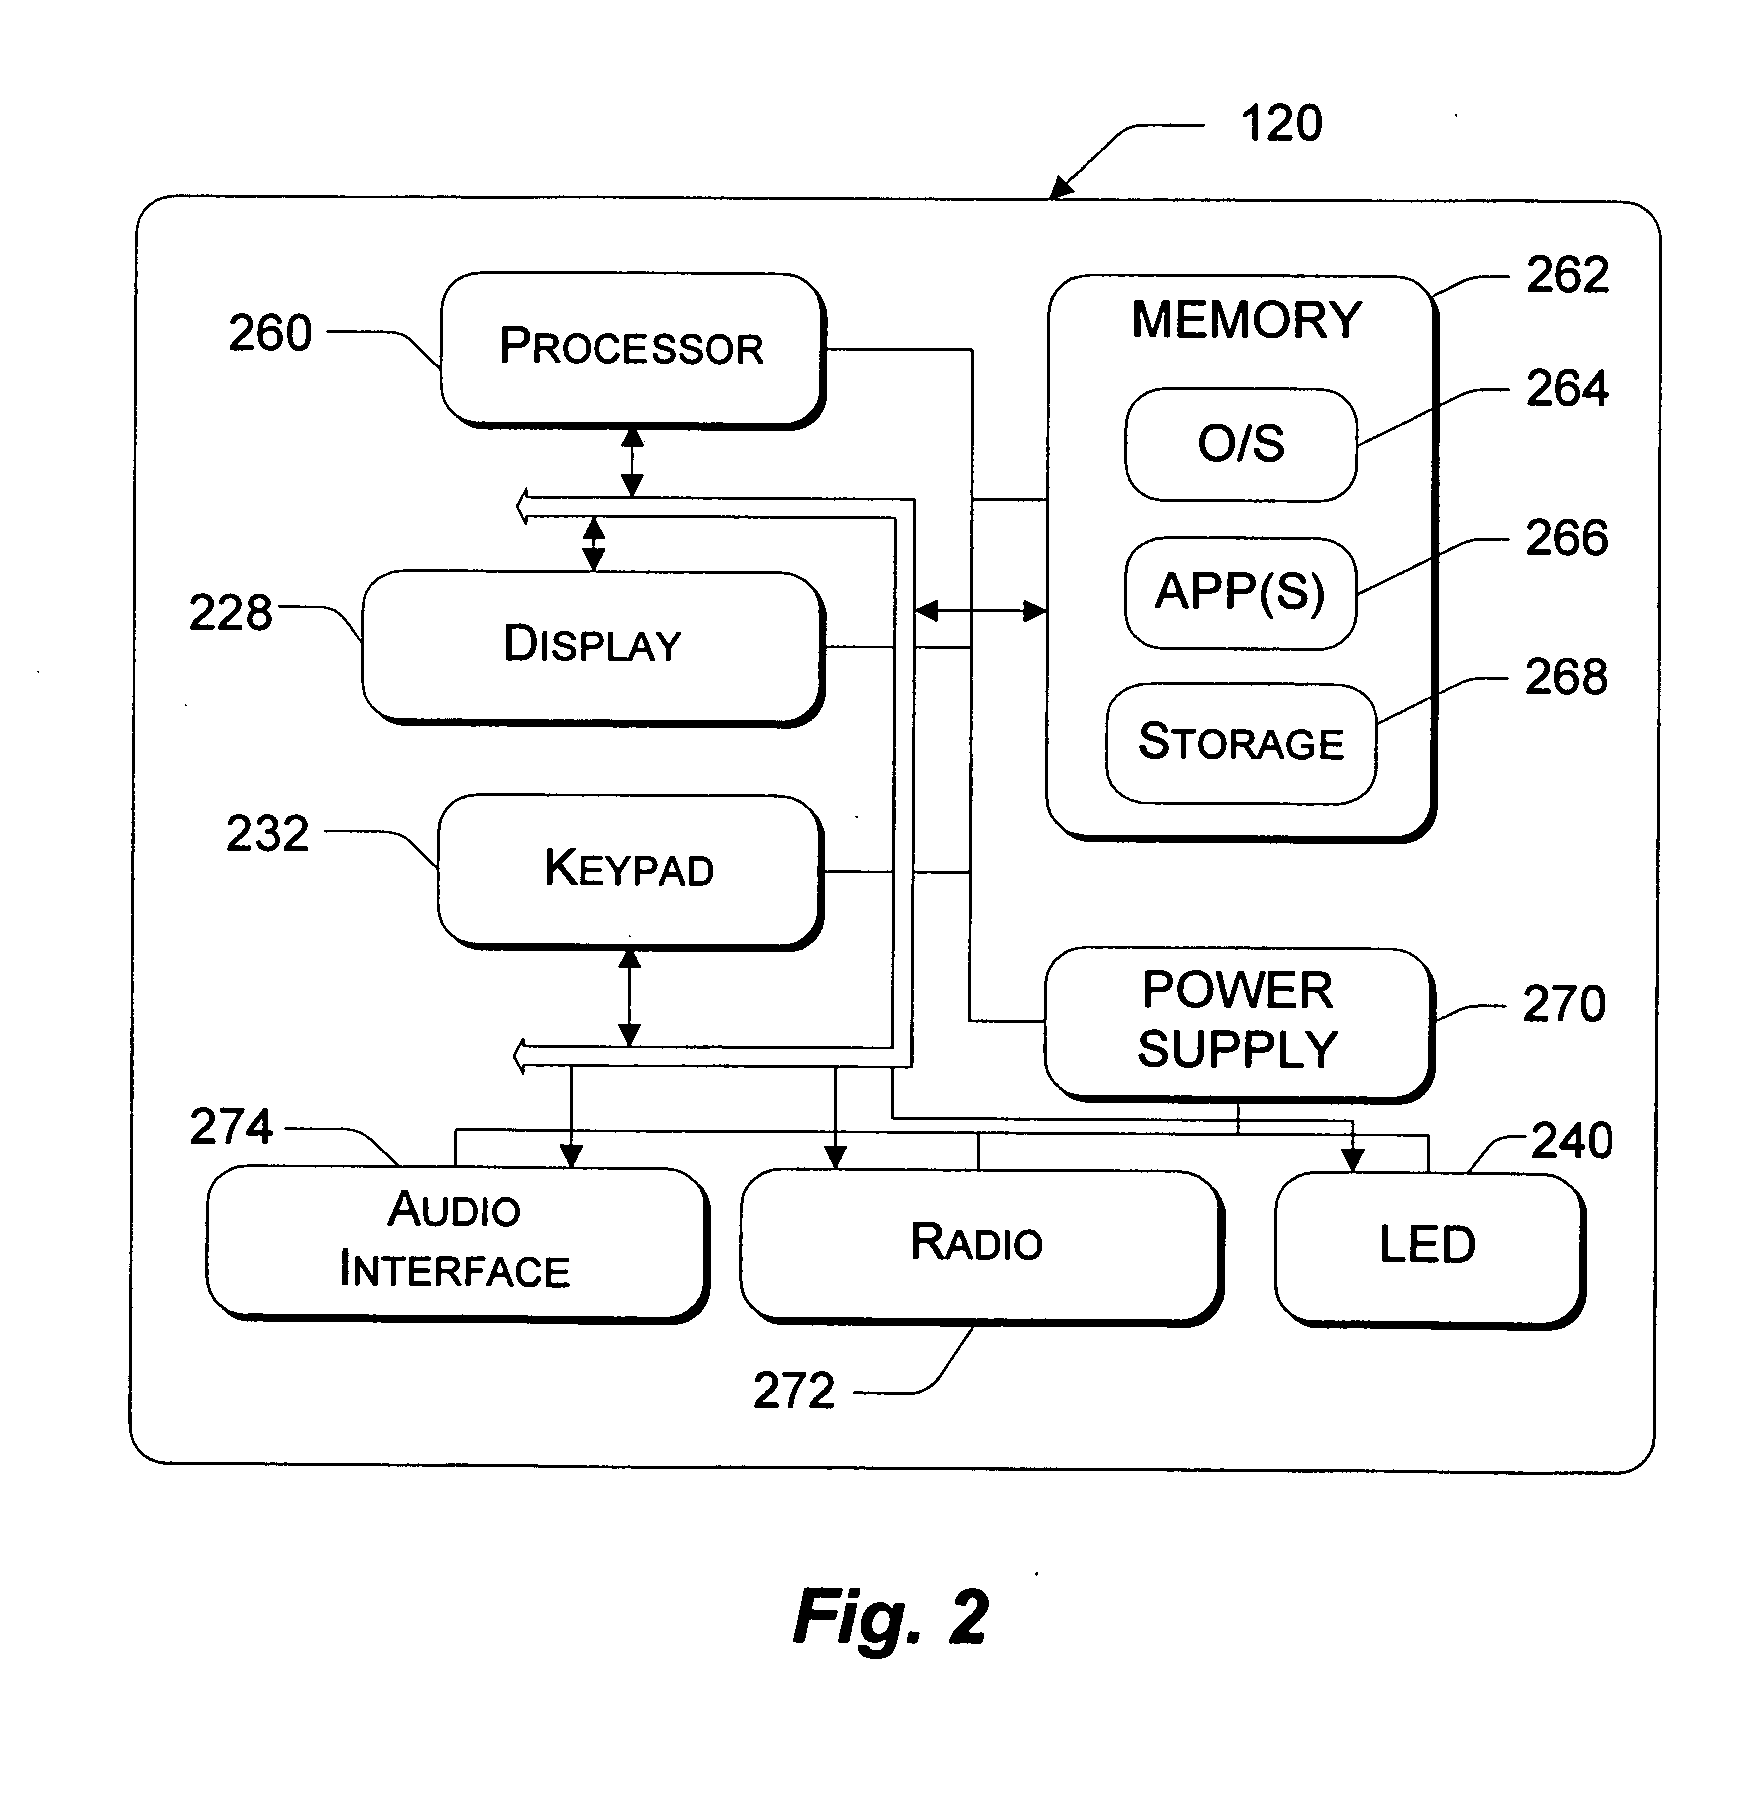 System and method for continuously provisioning a mobile device